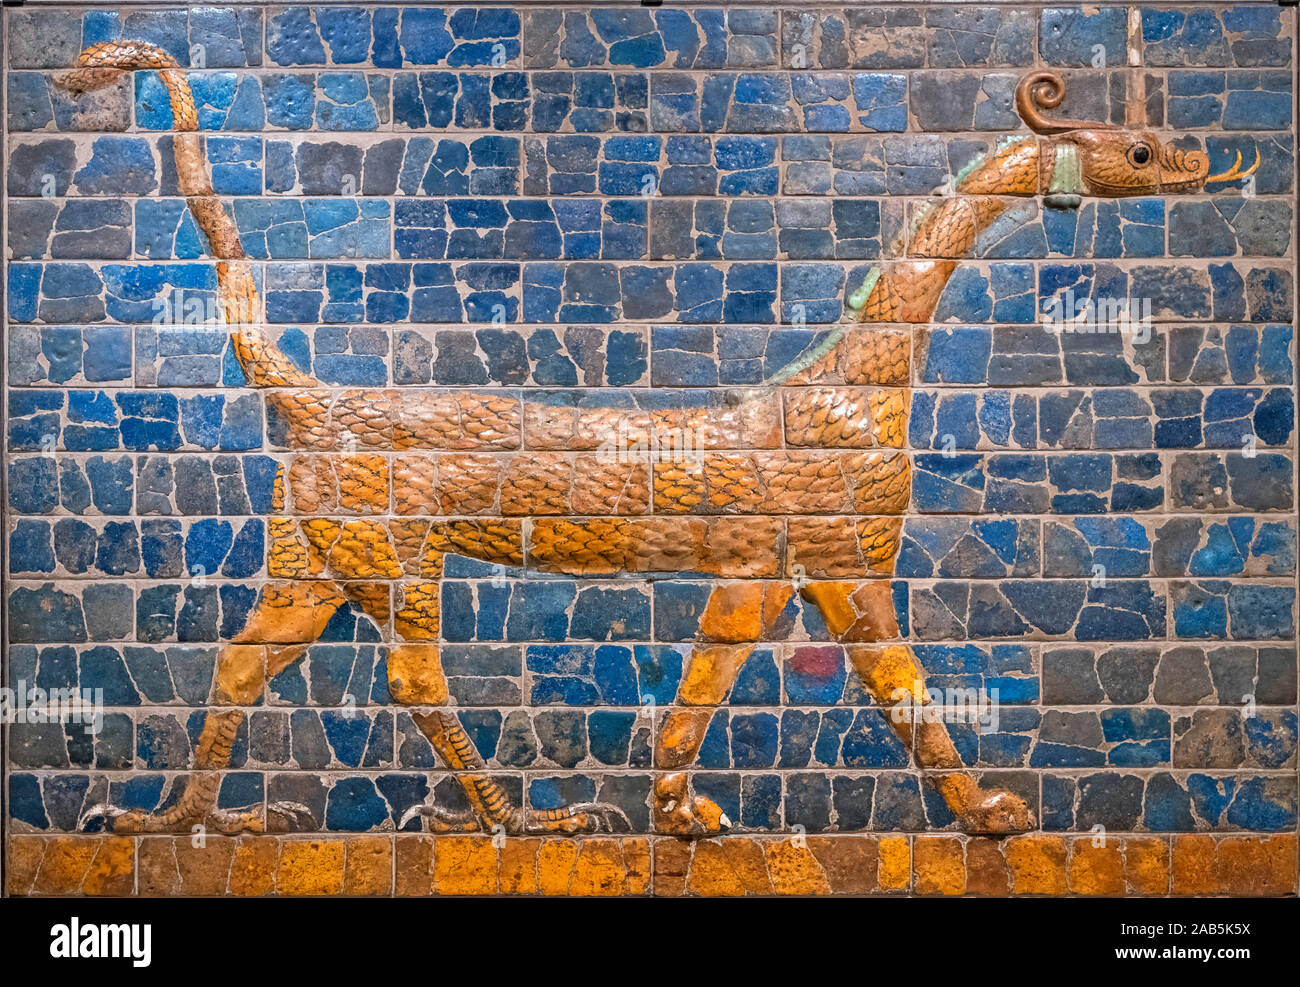 Babylonian Mushhushshu-dragon, Symbol of the God Marduk, 604 - 562 BC, glazed terracotta and molded brick. The striding dragon was a portion of the decoration of the Ishtar Gate in the ancient city of Babylon. Stock Photo